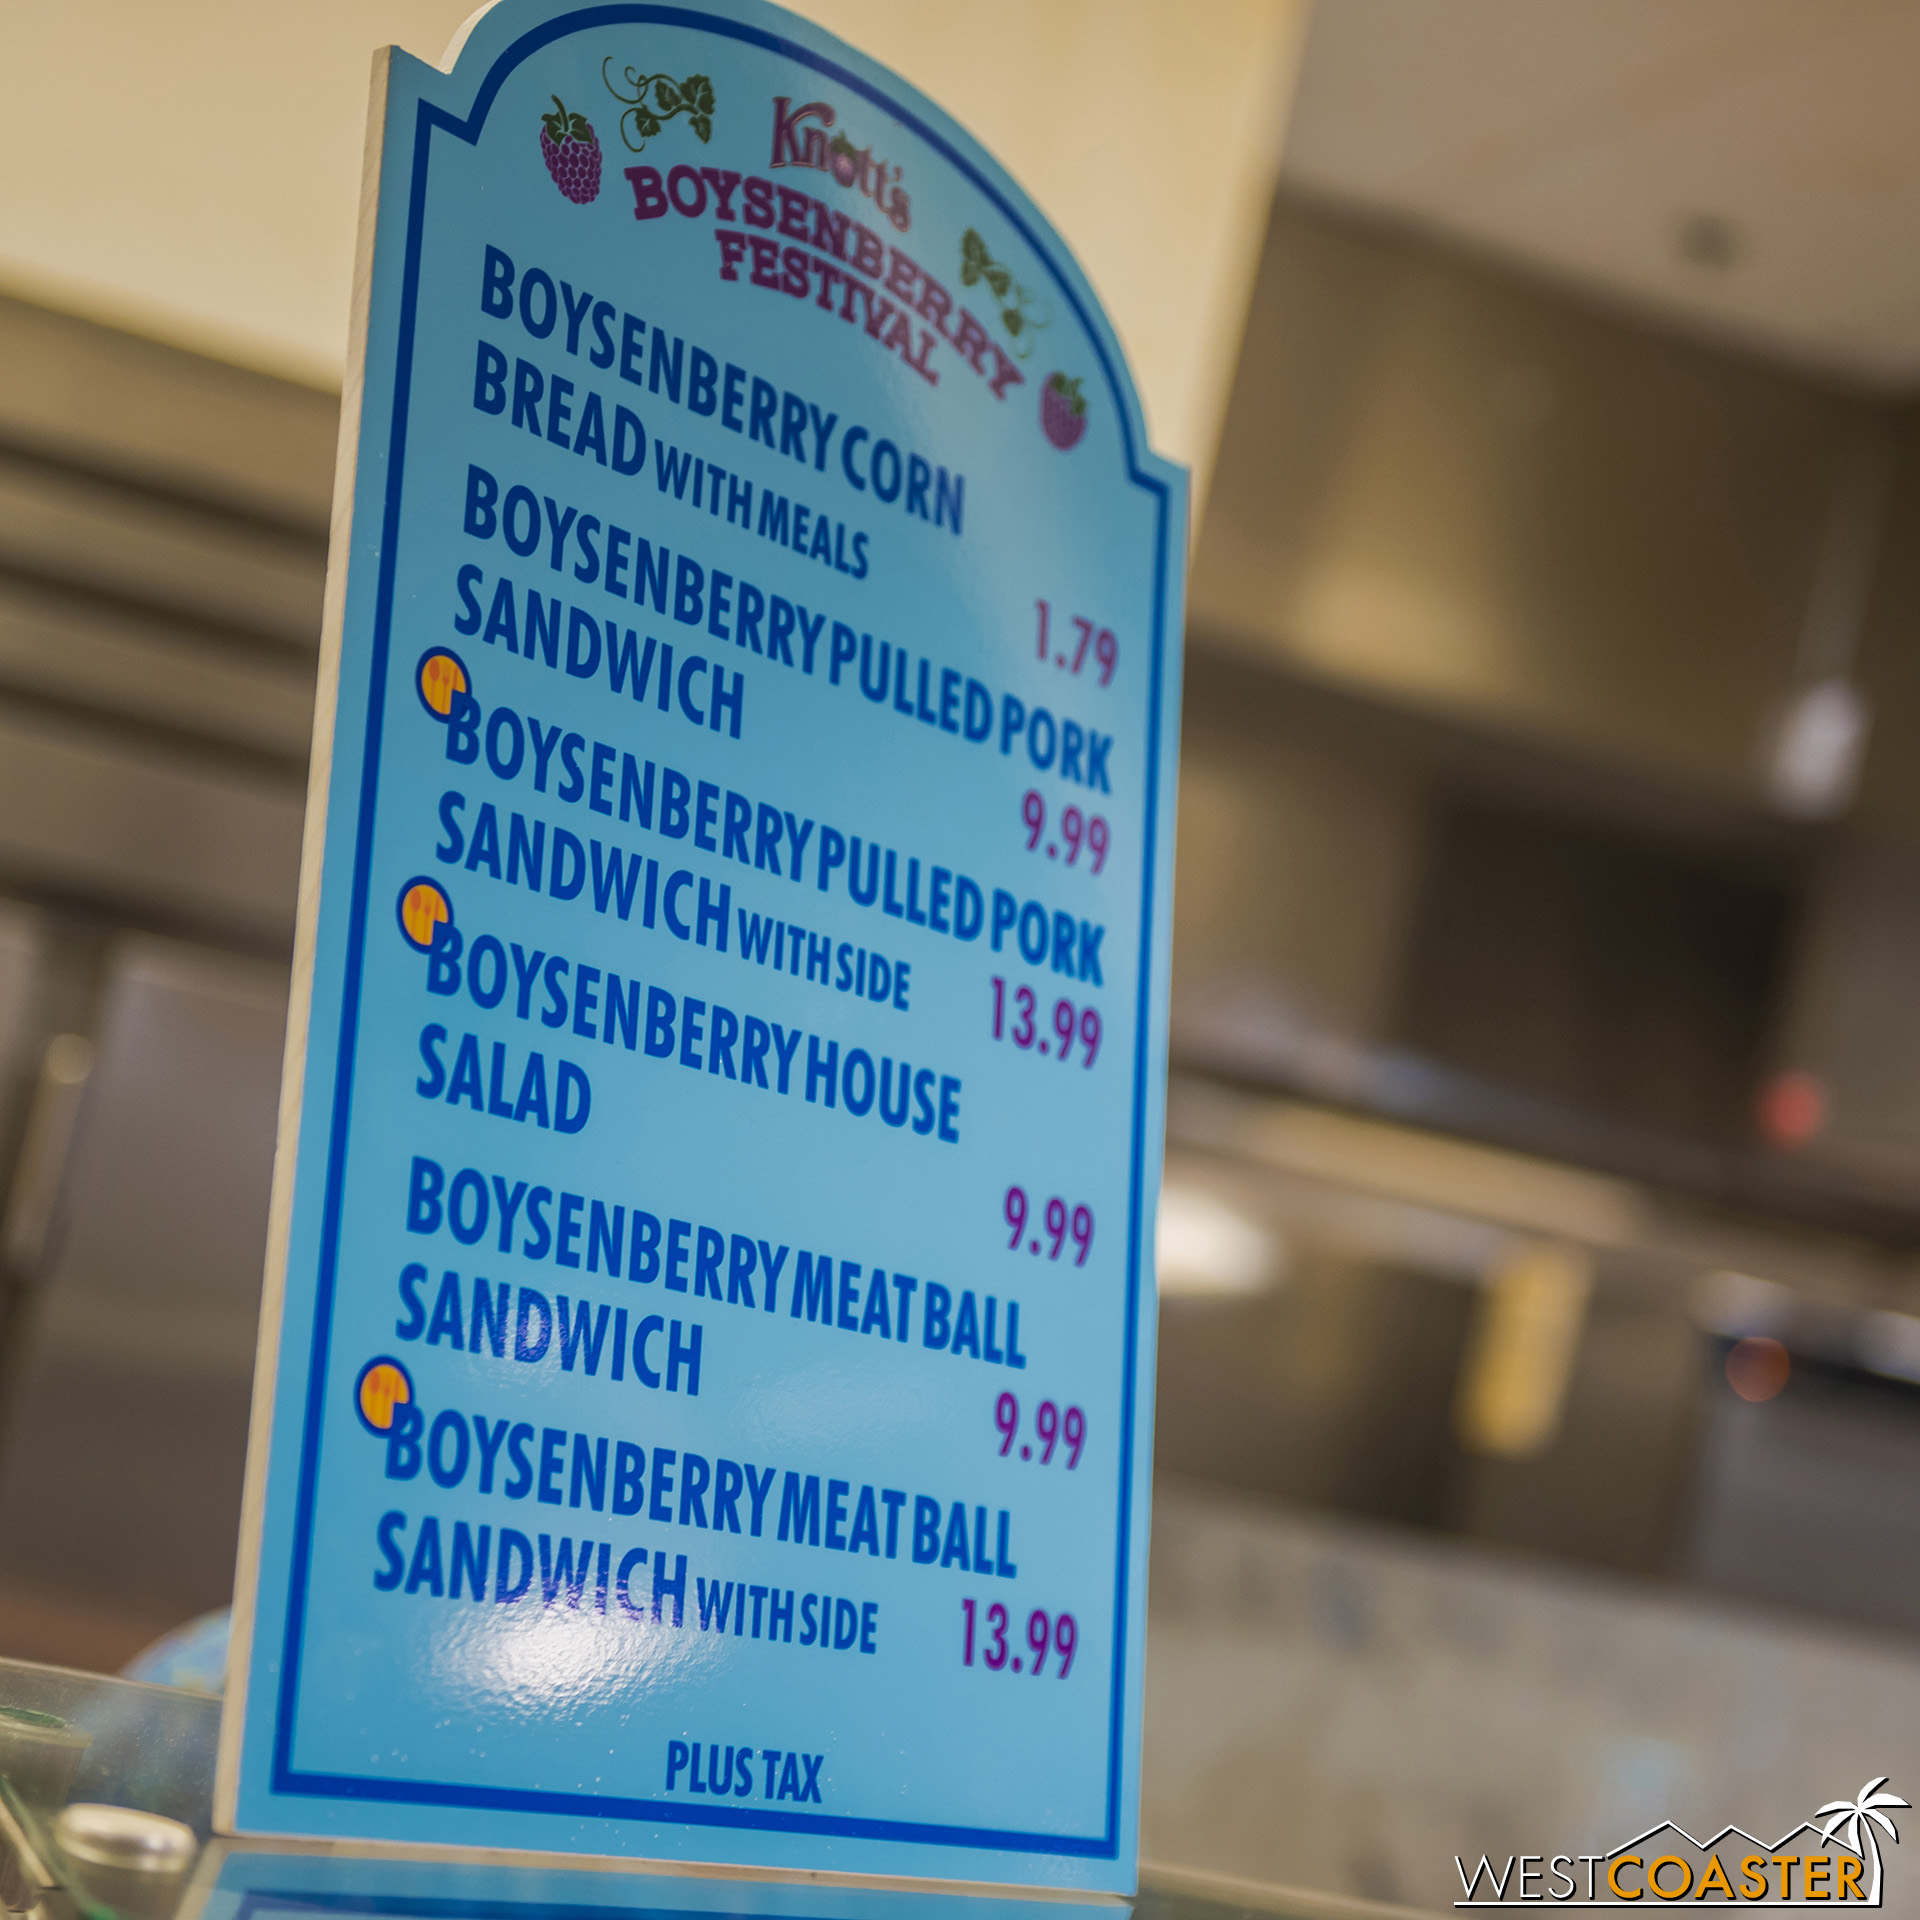  The Boardwalk BBQ has a big selection of boysenberry barbecue! 